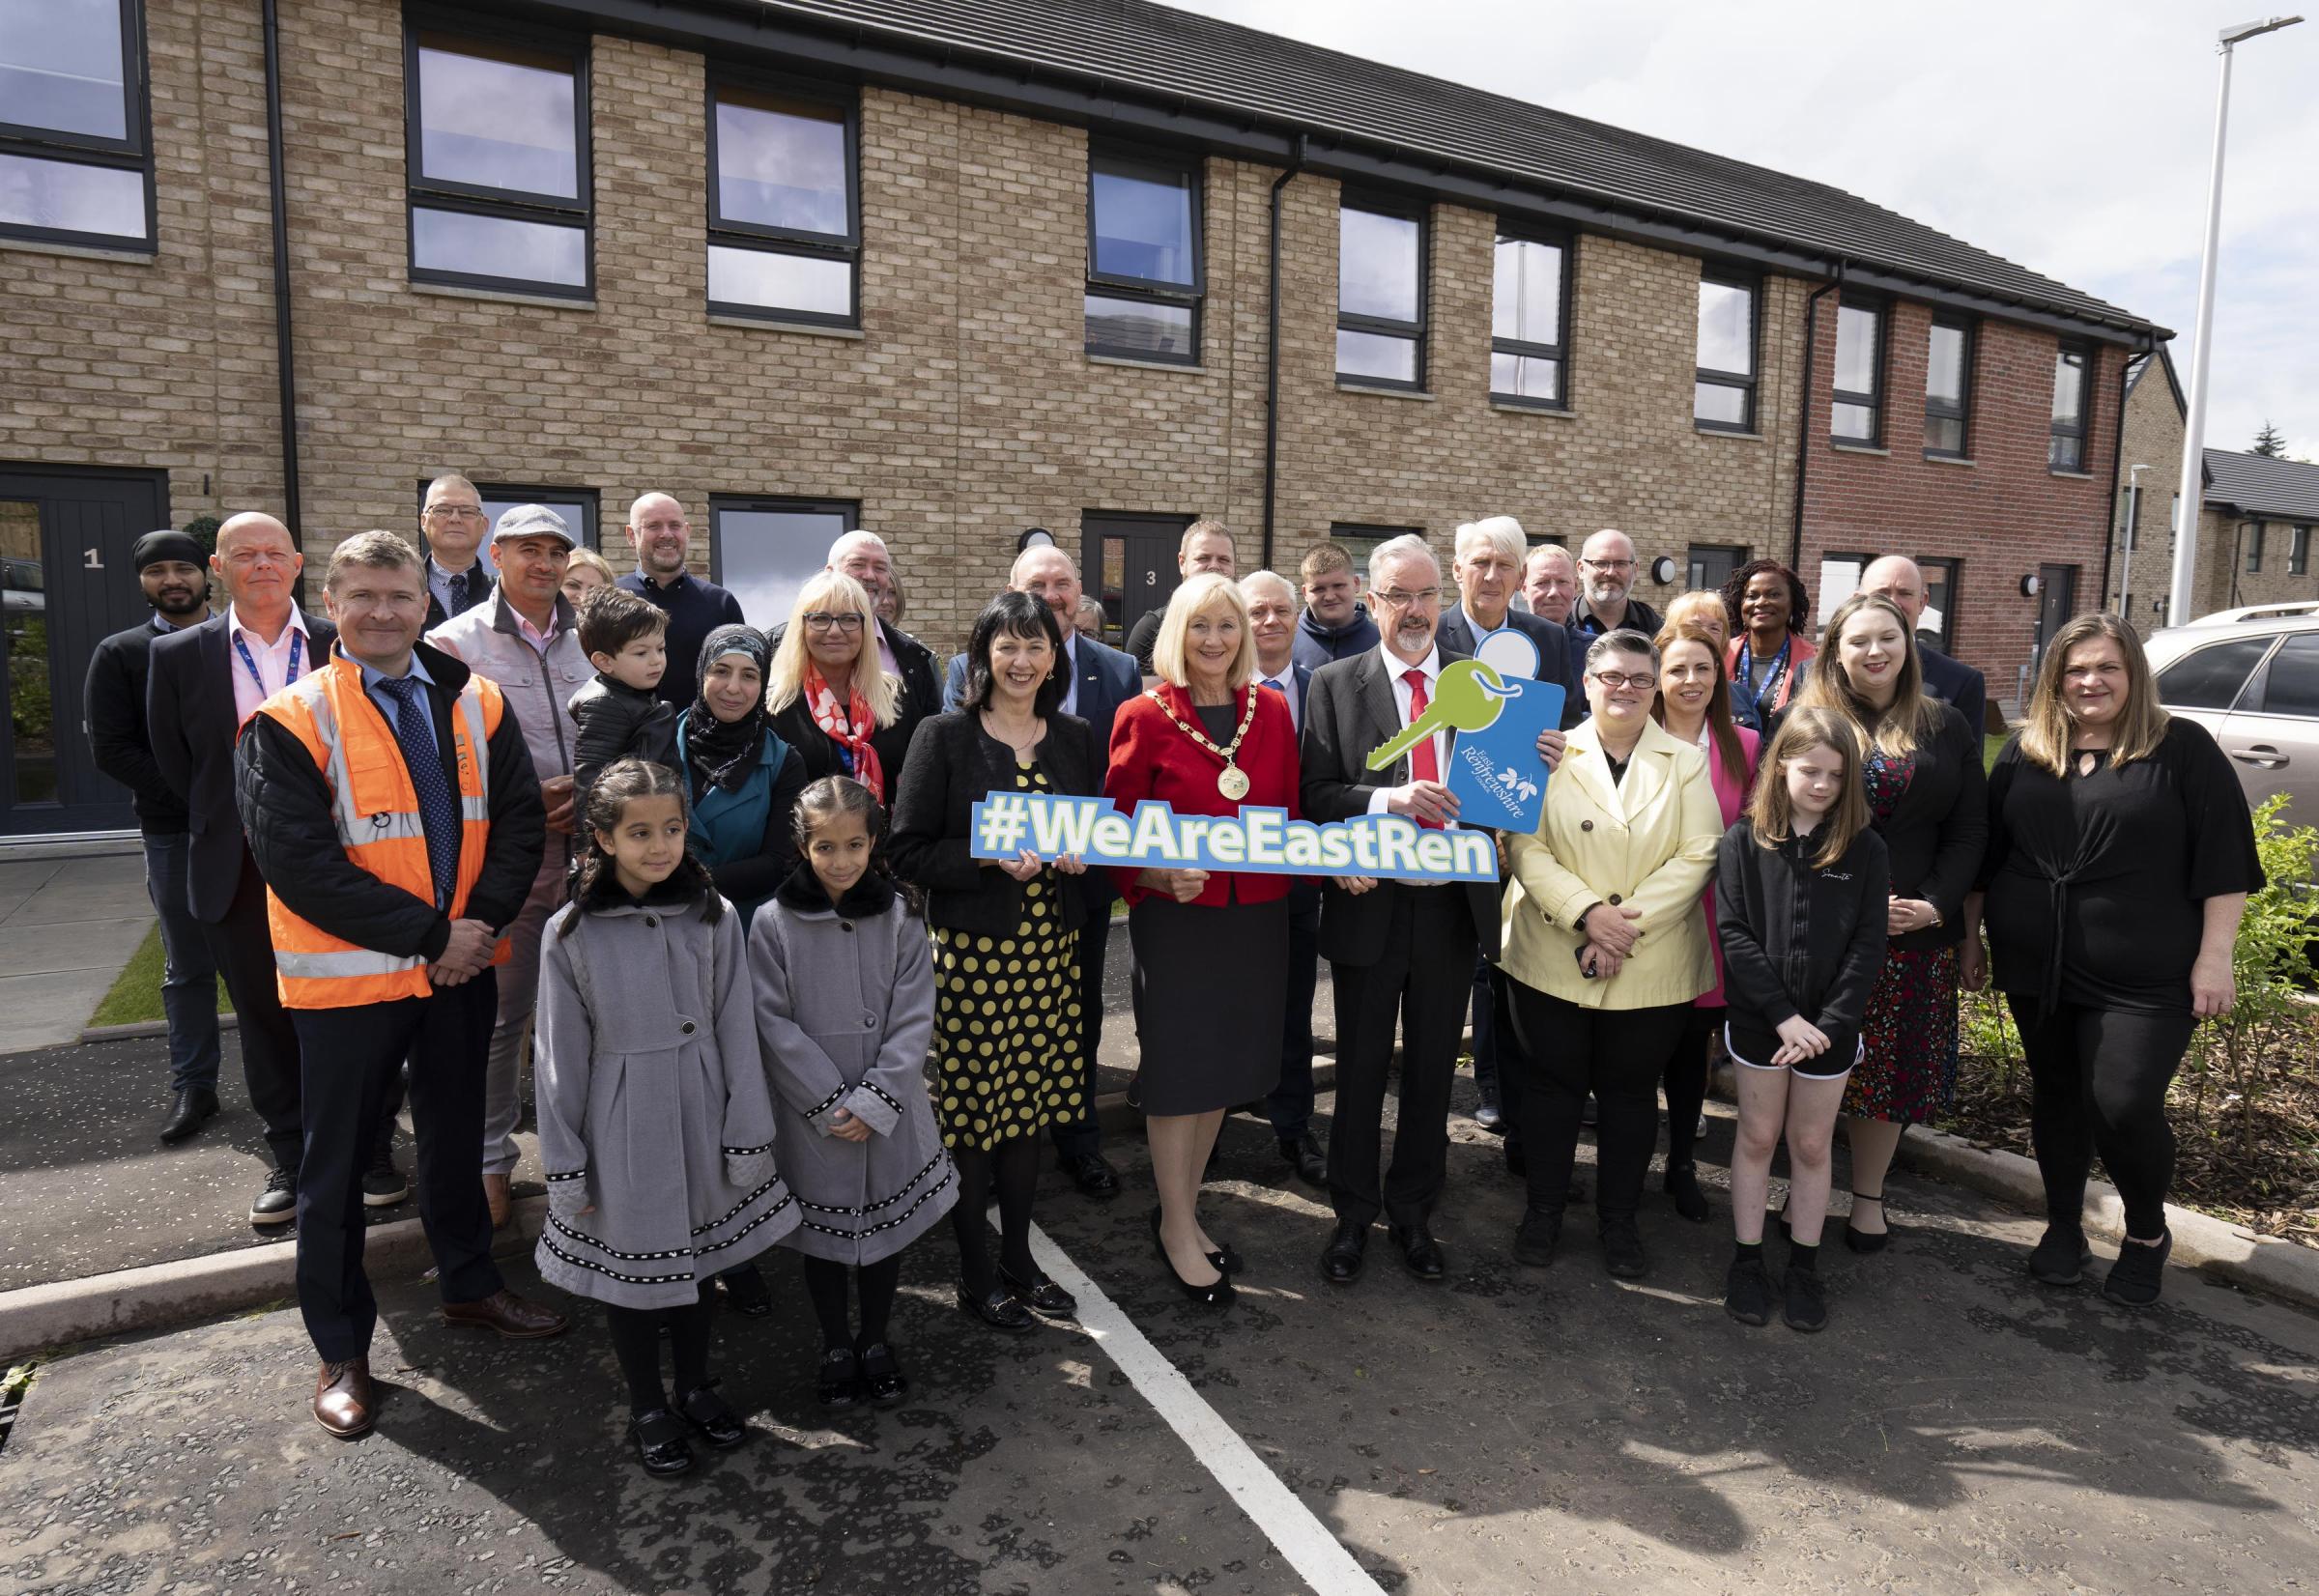 More than 200 tenants to move into 'high-quality new builds' in Barrhead